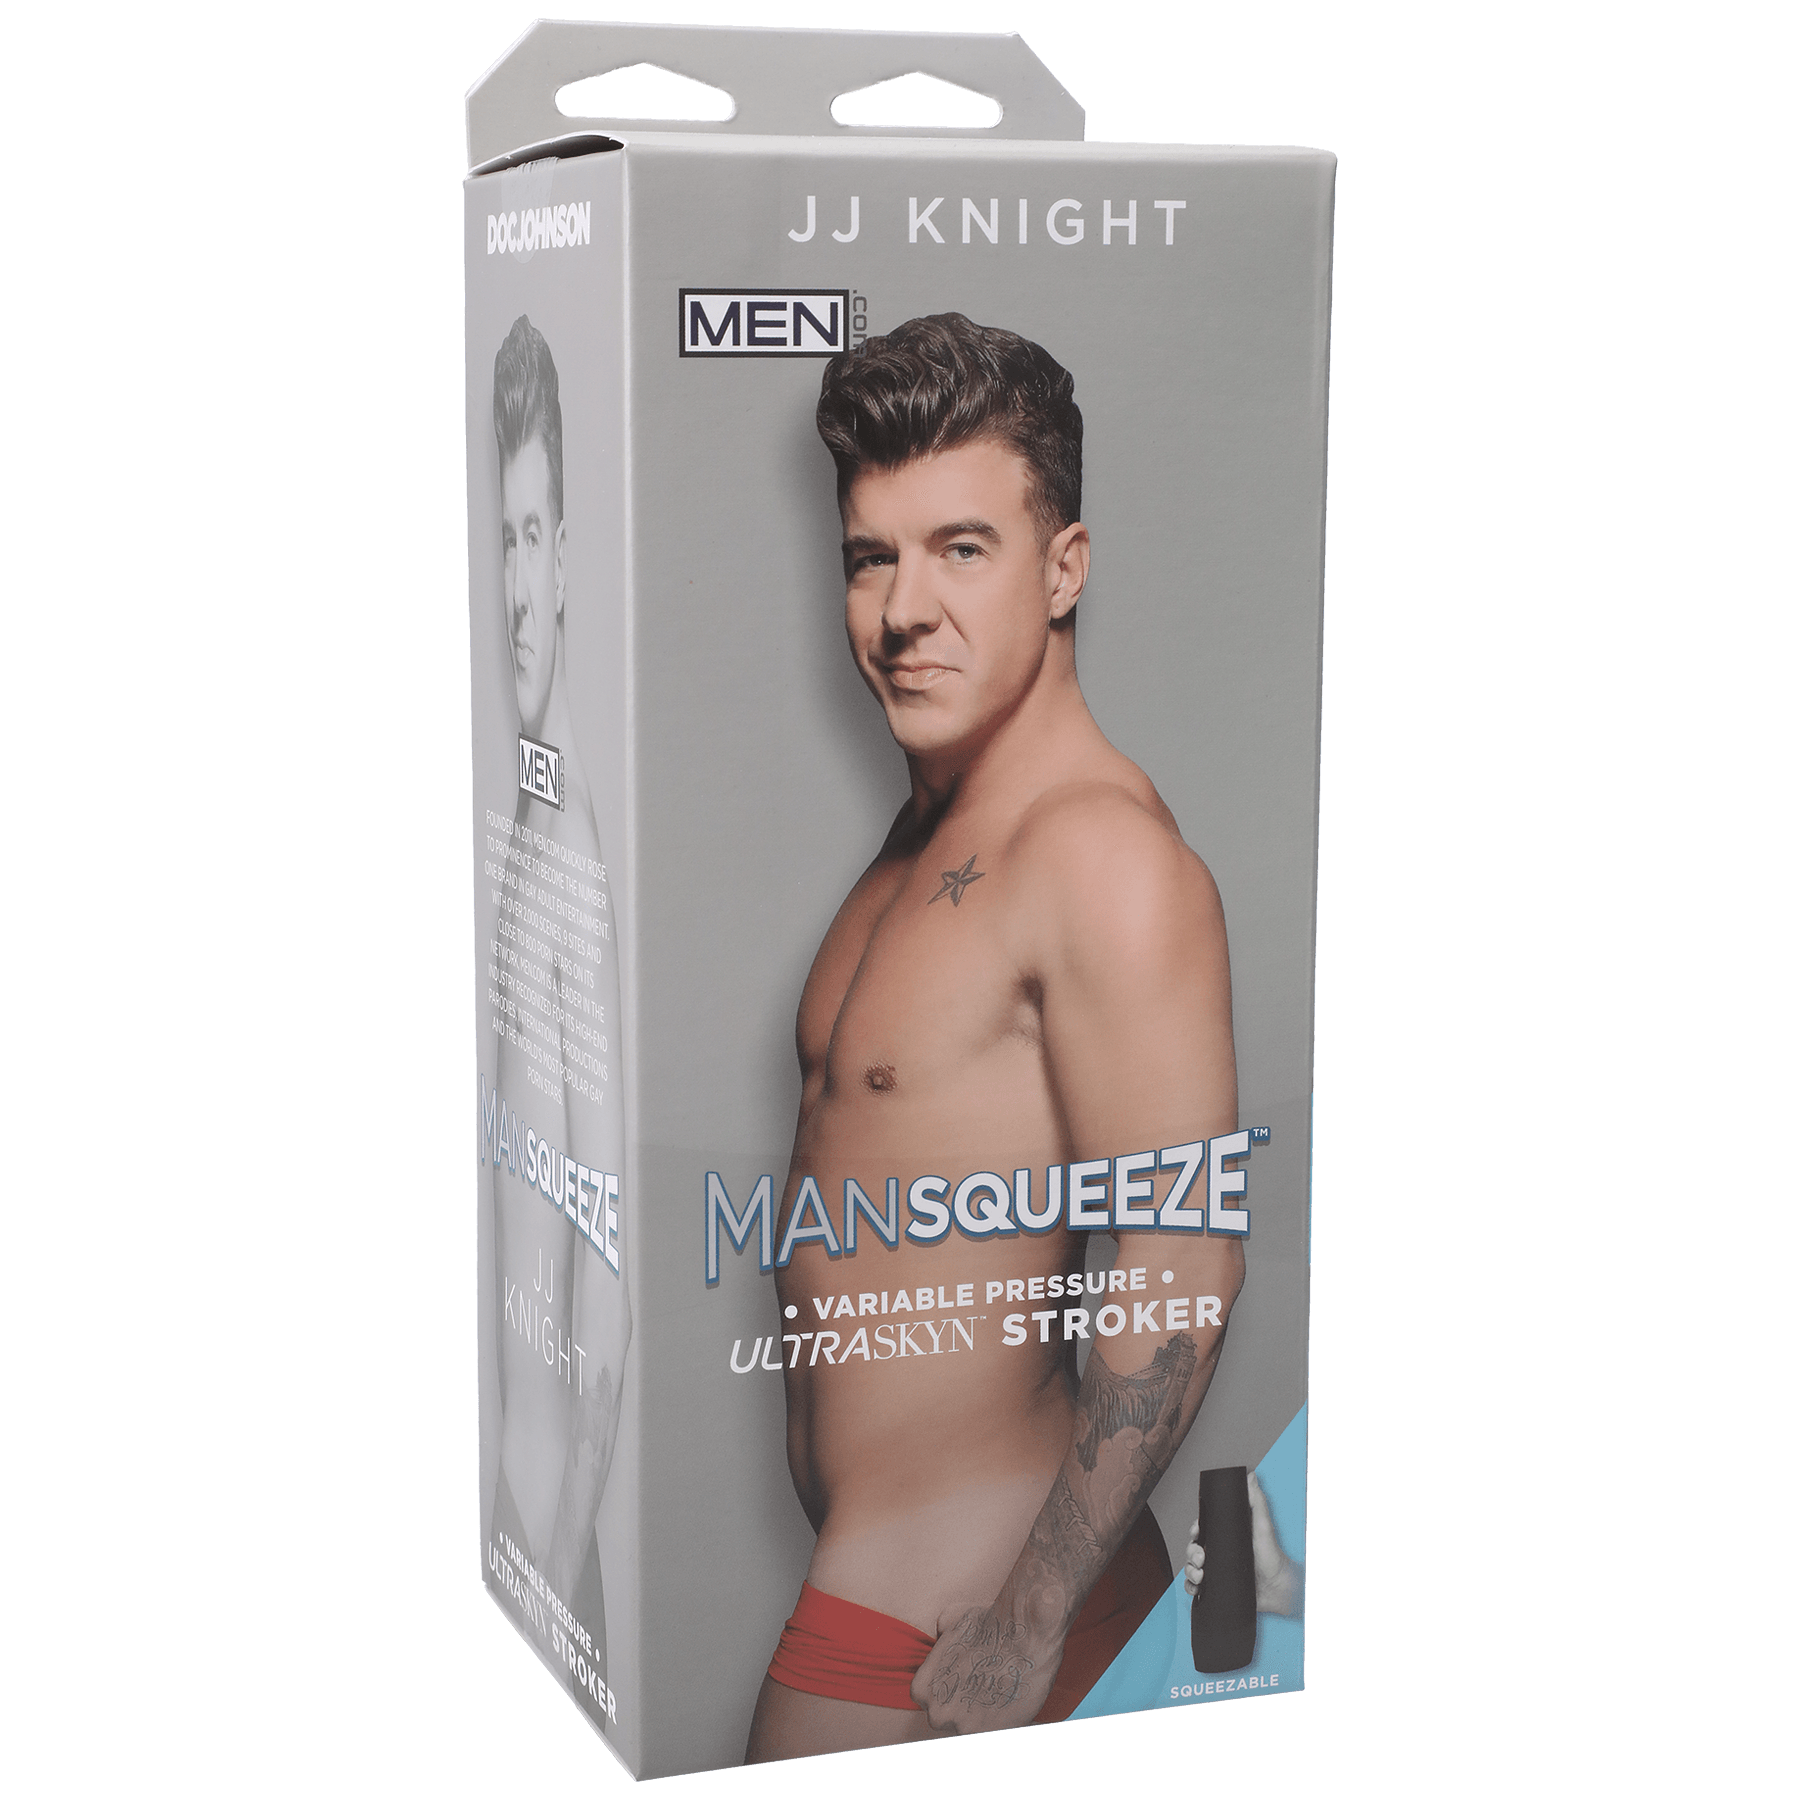 Doc Johnson Man Squeeze JJ Knight Ass - Buy At Luxury Toy X - Free 3-Day Shipping